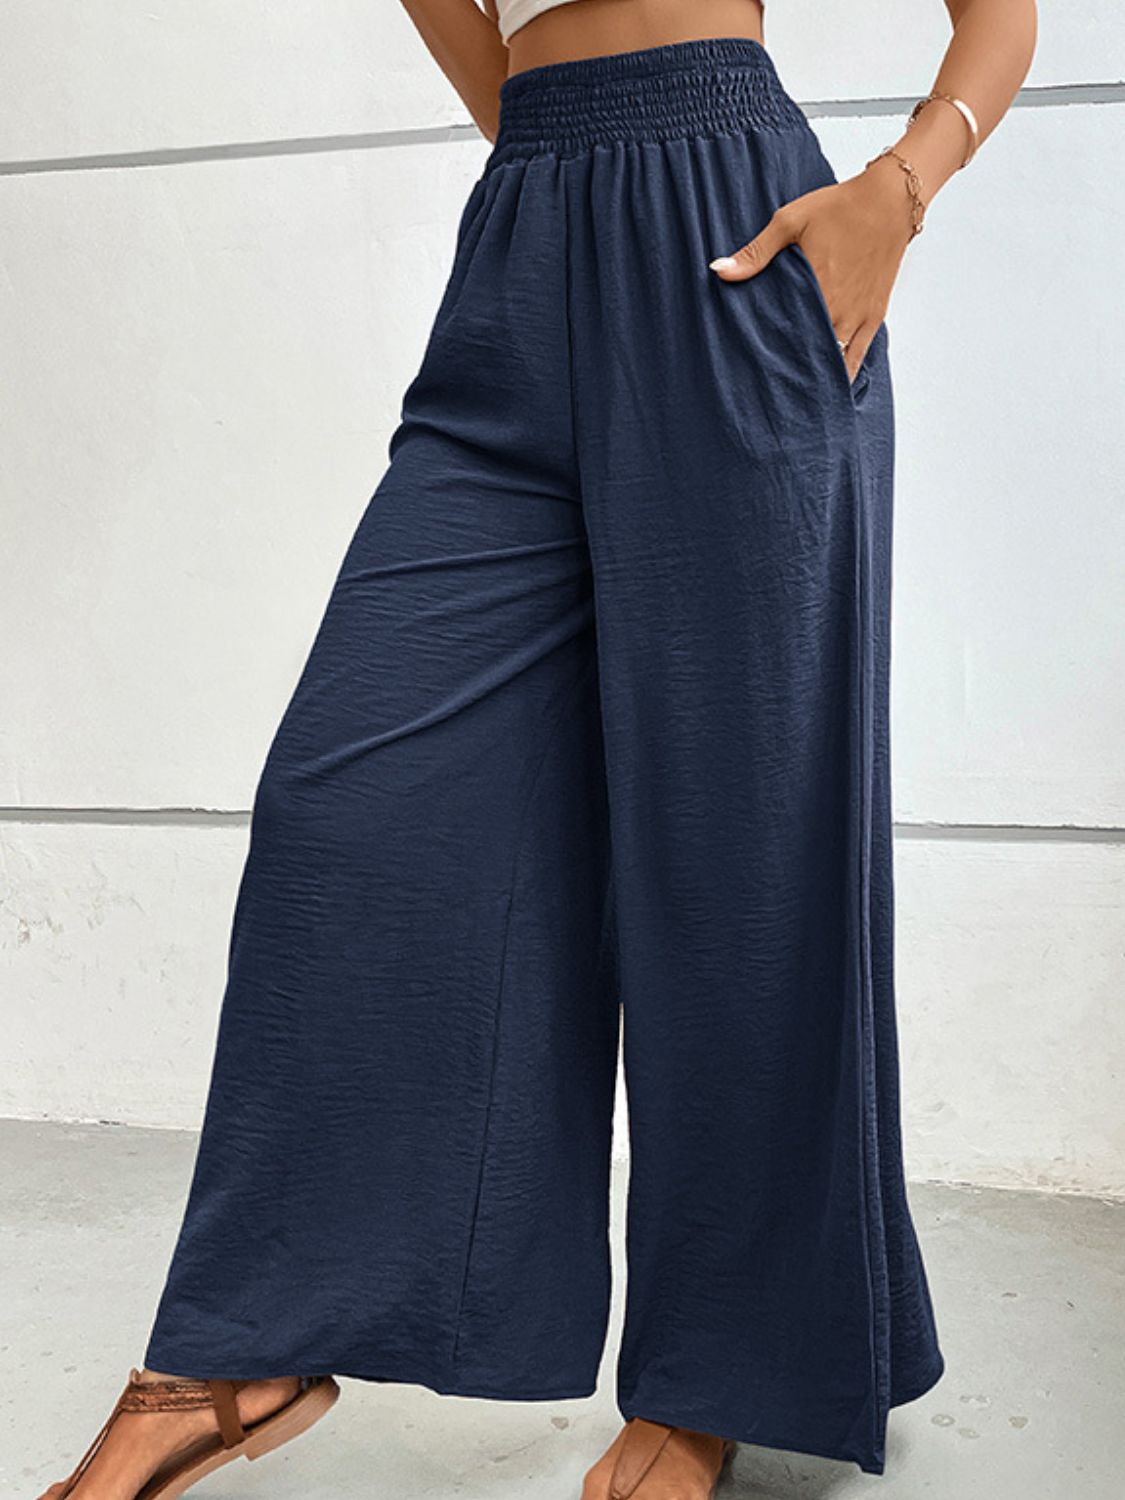 Wide Waistband Relax Fit Long Pants | CLOTHING,SHOES & ACCESSORIES | Hundredth, pants, relax fit, Ship From Overseas, Women's Apparel, women's clothing, women's fashion | Trendsi